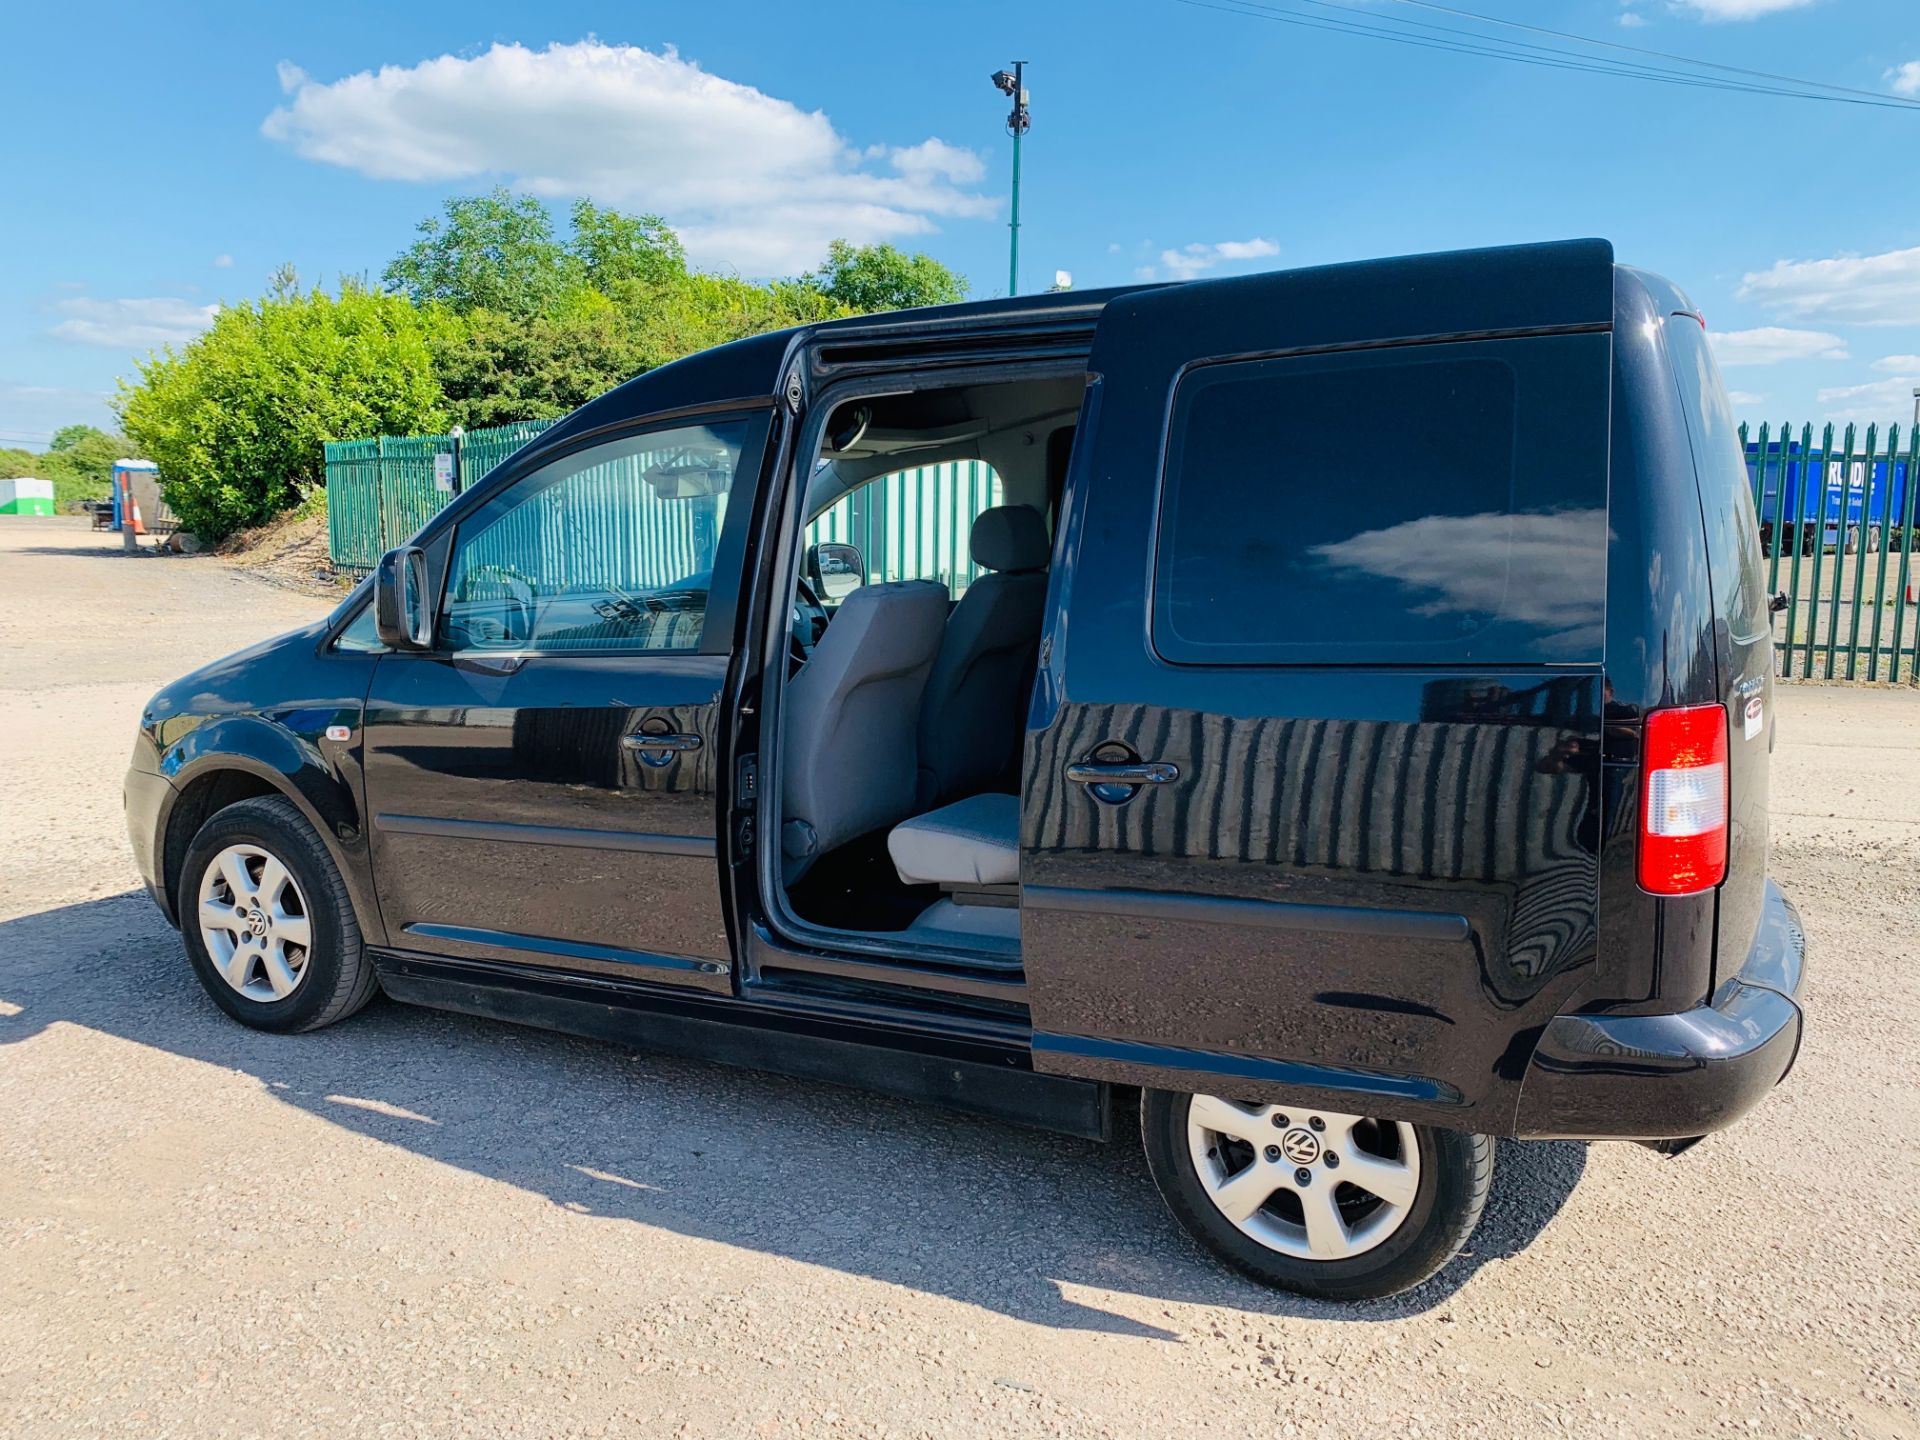 (ON SALE) VW CADDY 1.9TDI "LIFE" DSG AUTO-WHEELCHAIR ACCESSIBLE VEHICLE - ONLY 42K MILES!! - NO VAT! - Image 13 of 15